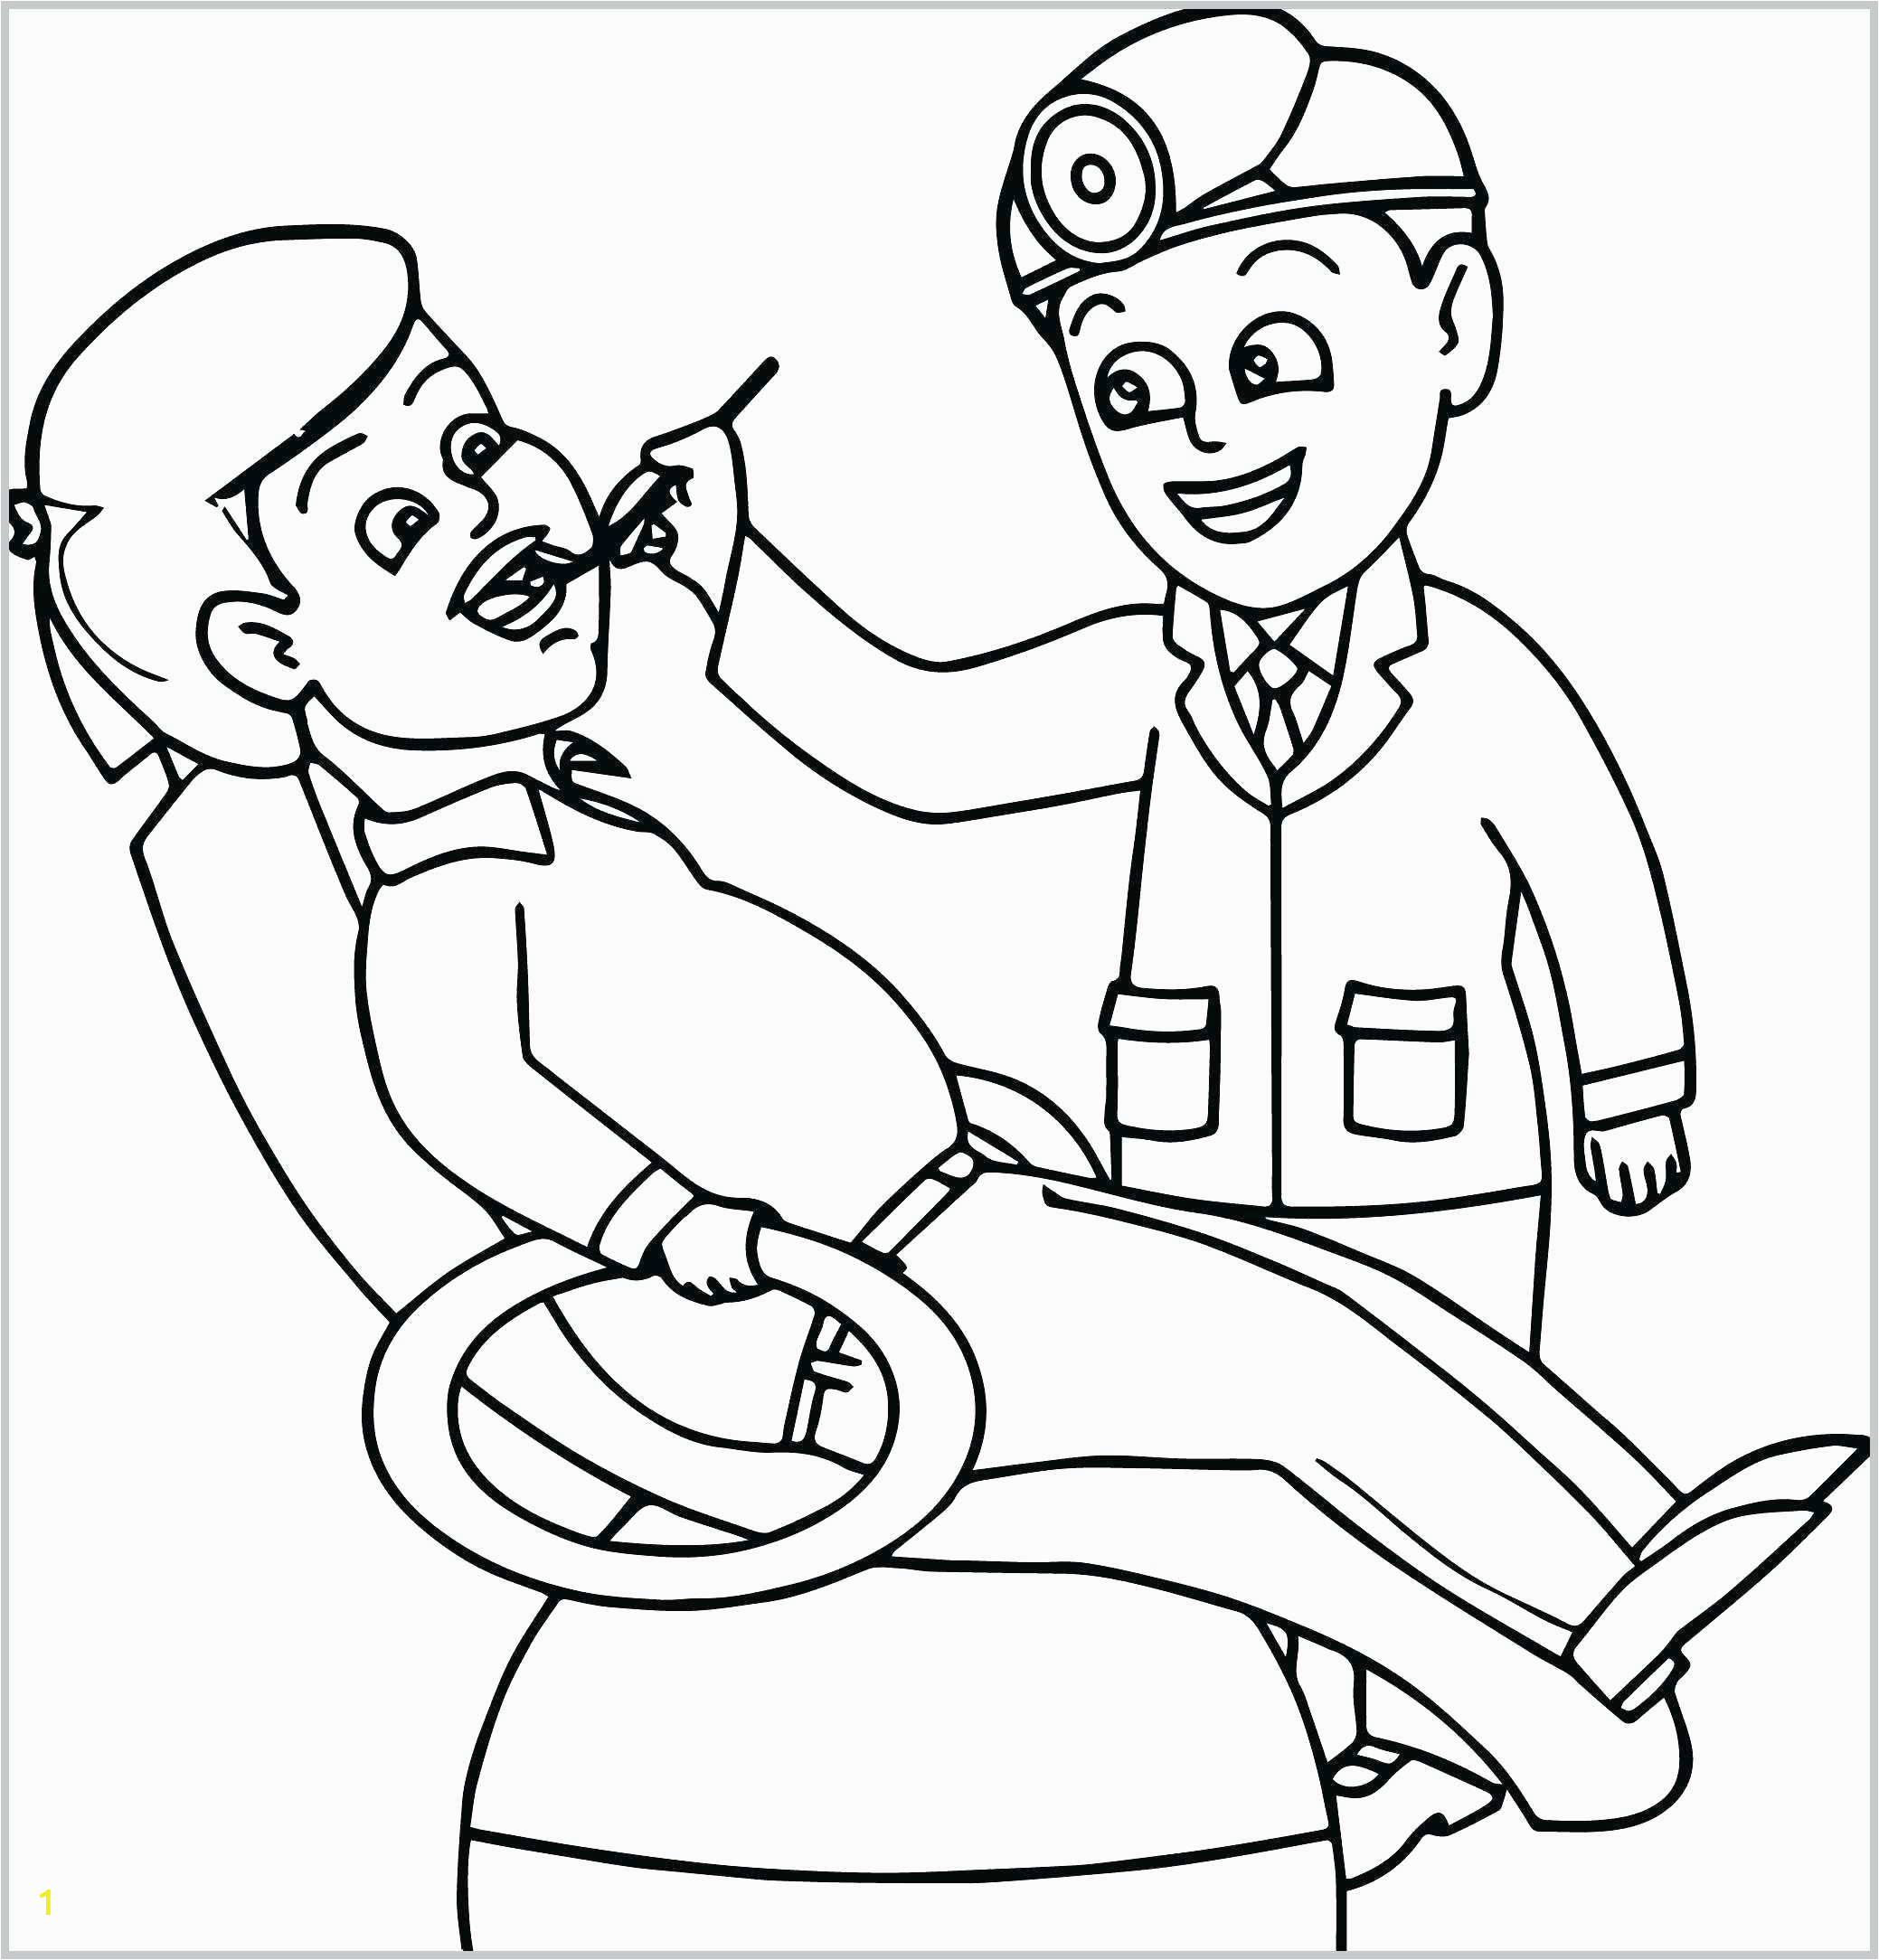 Bumblebee Movie Coloring Pages 60 Most Wonderful Coloring Pages Dental Free Dentist